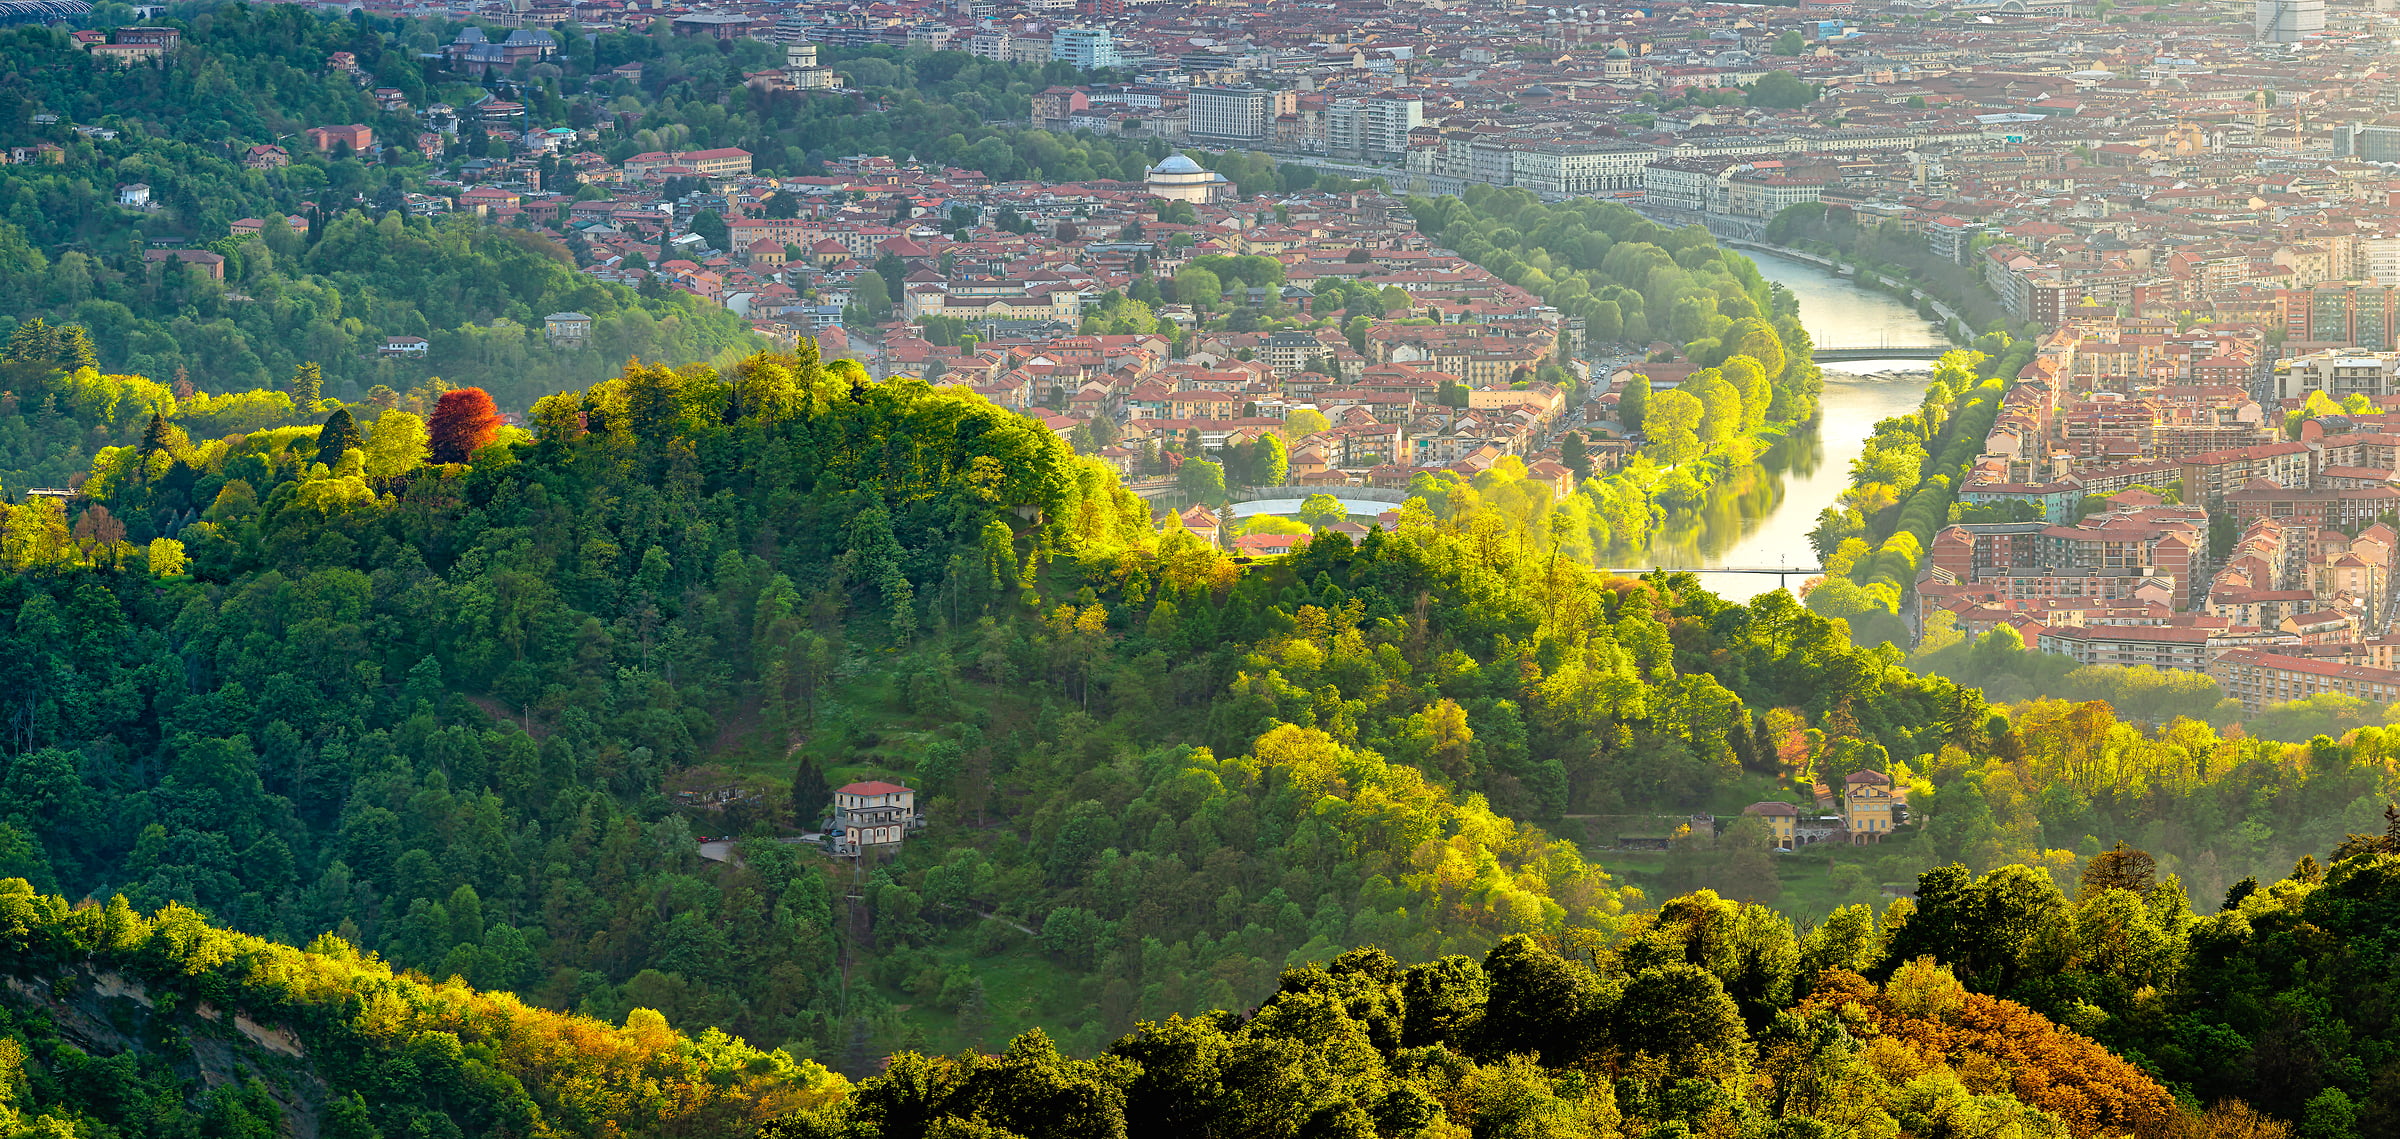 105 megapixels! A very high resolution, large-format VAST photo print of Turin, Italy; city photograph created by Duilio Fiorille in Turin, Piedmont, Italy.